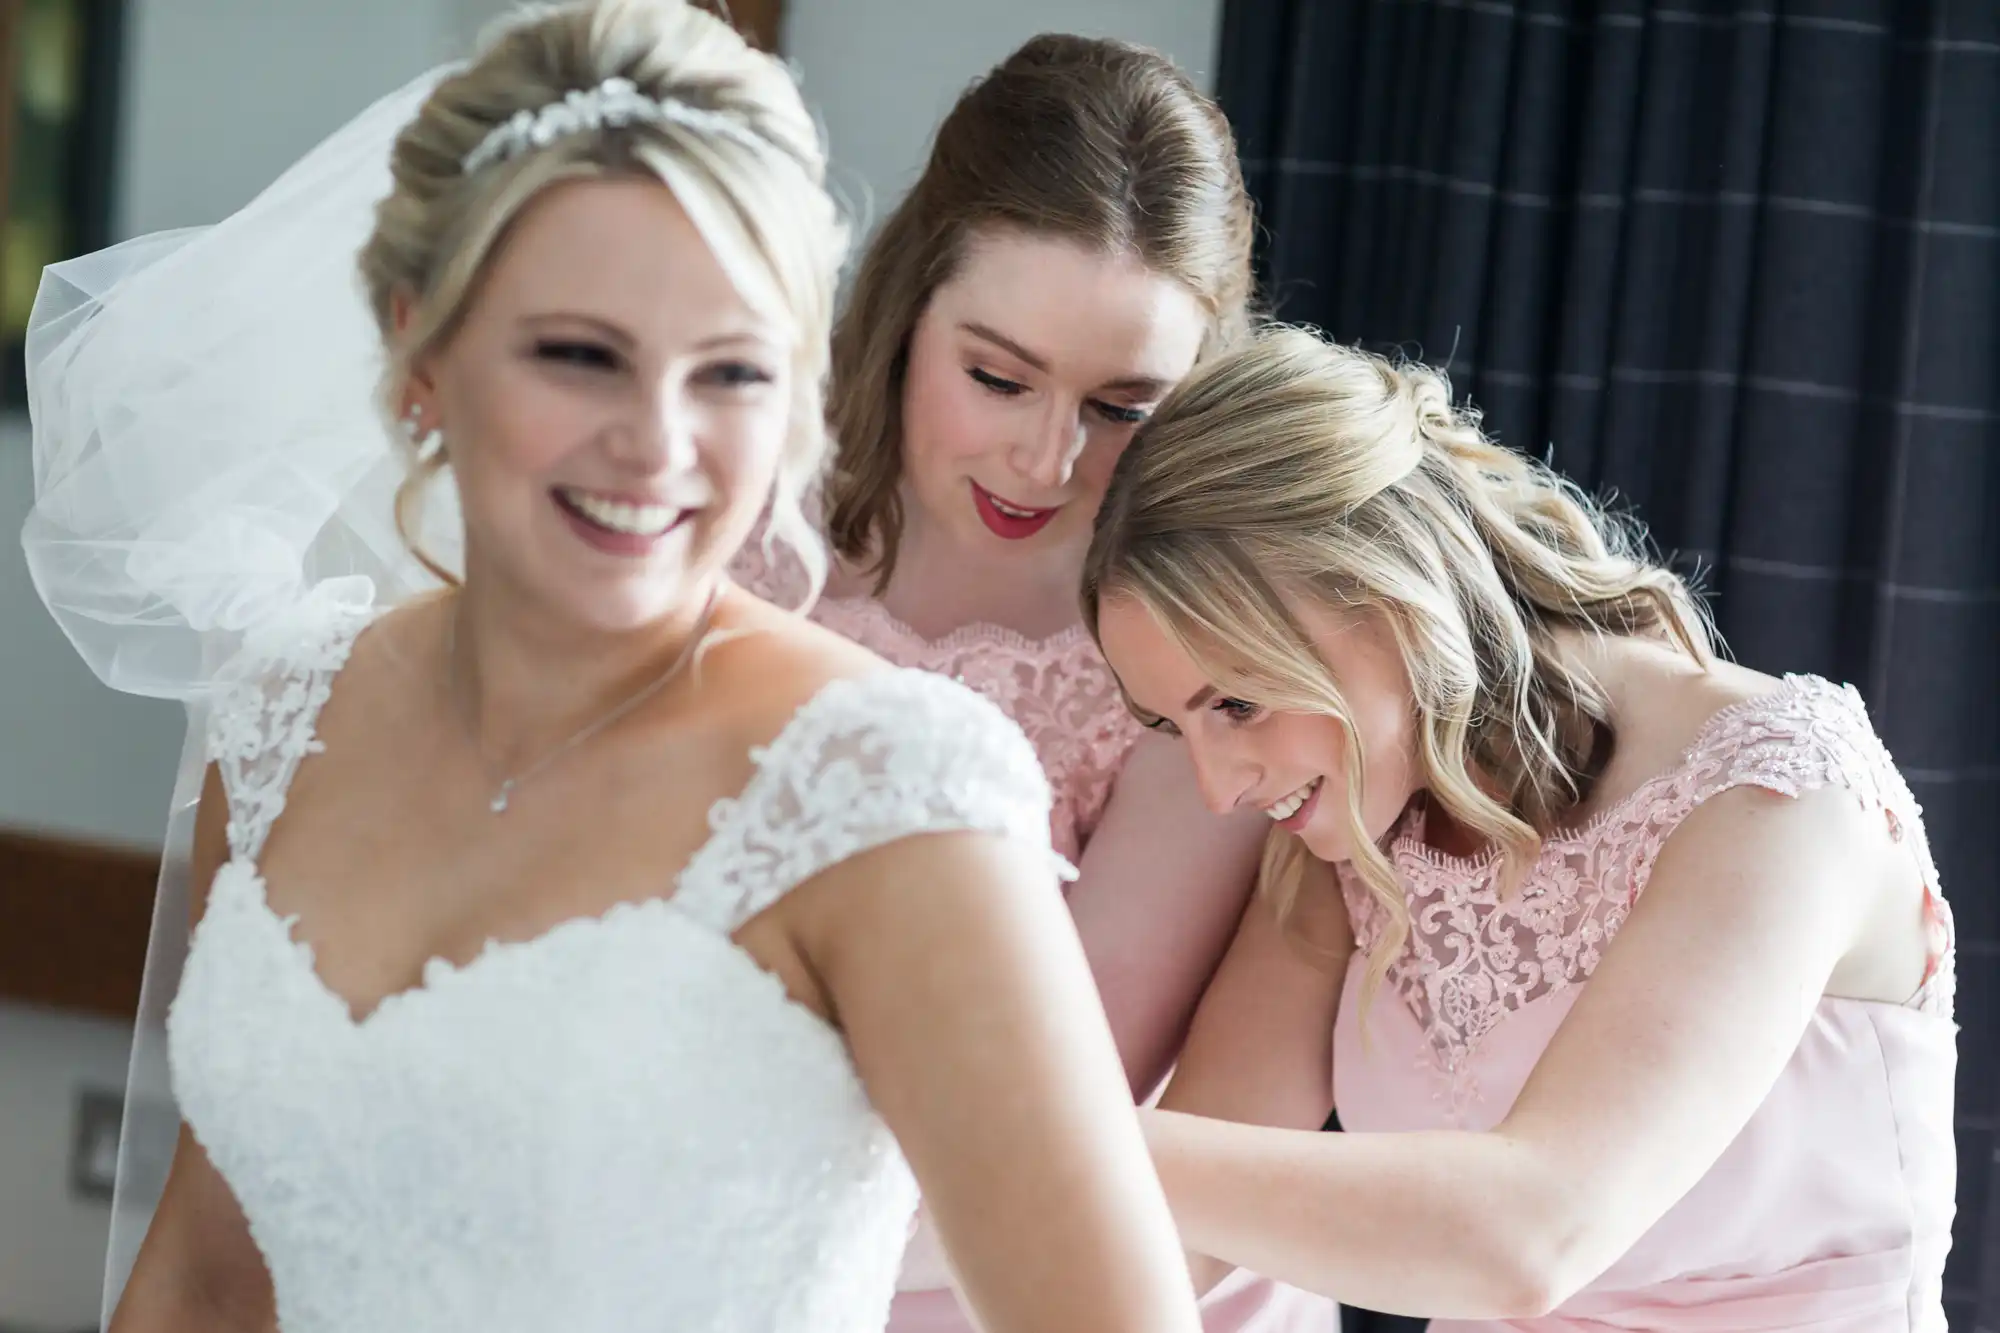 A bride in a white lace wedding dress is getting help adjusting her gown from two bridesmaids in pink dresses. All three women are smiling.